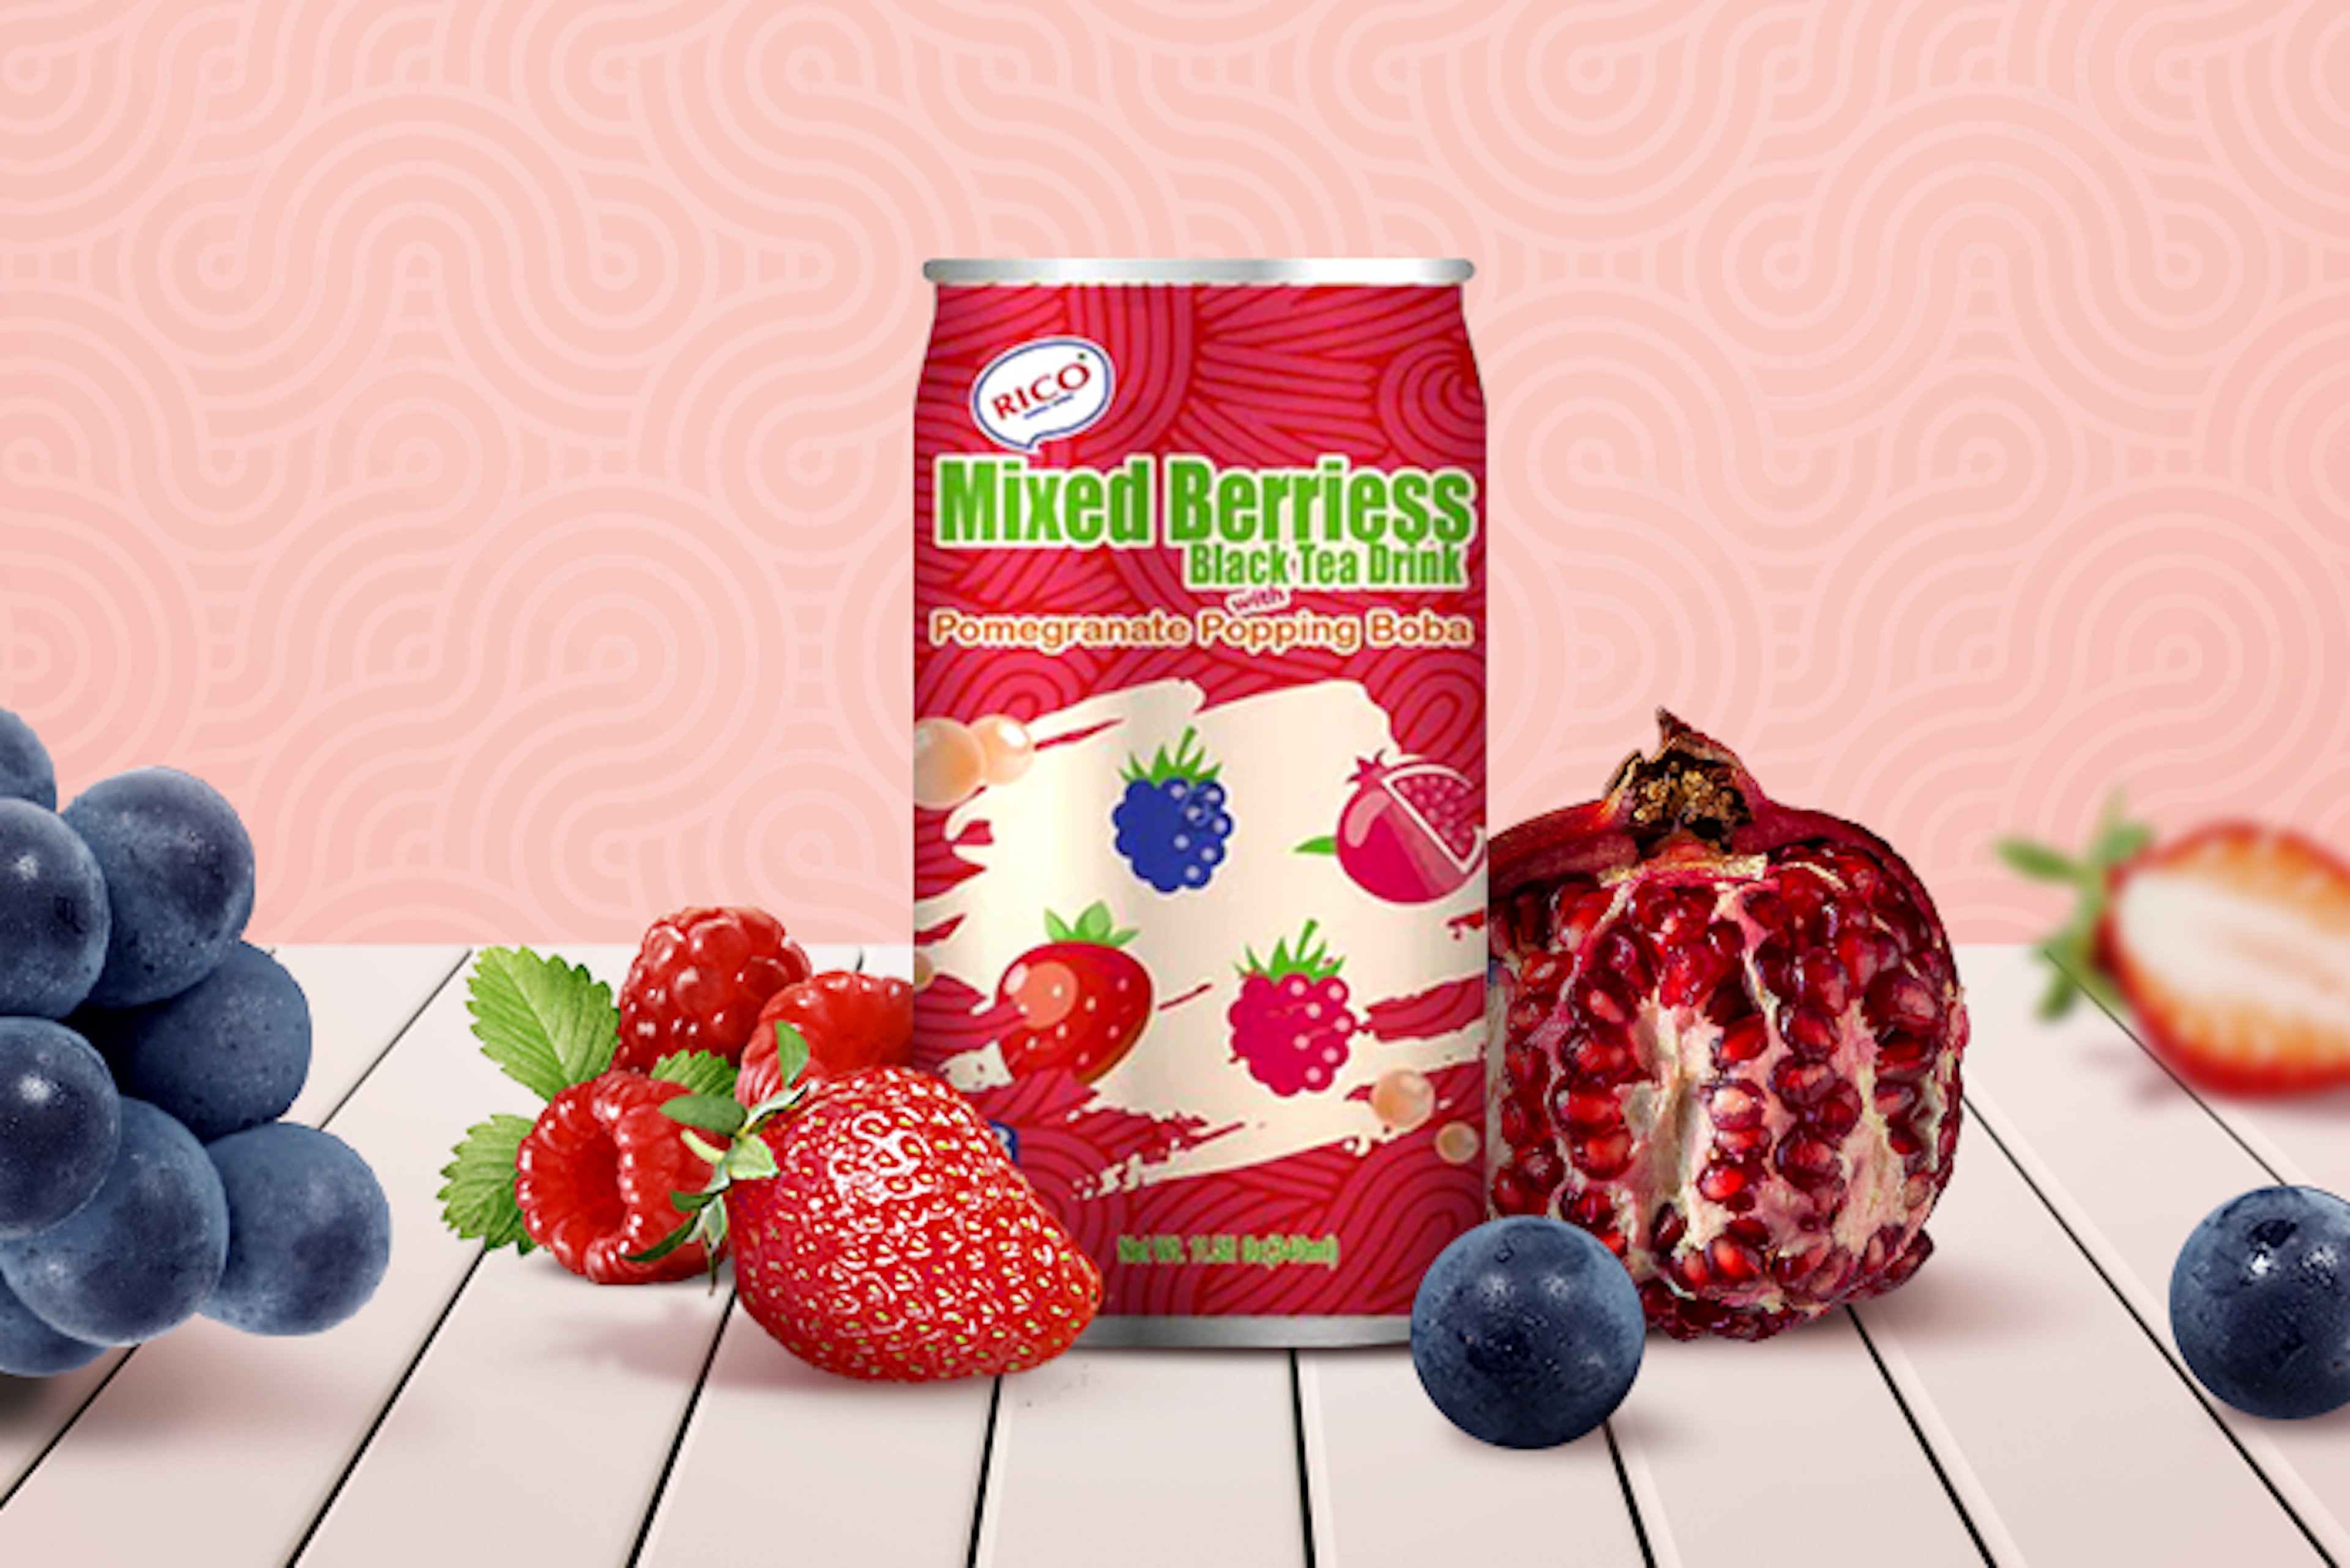 RICO Black Tea Drink with Mixed Berries & Pomegranate Boba 340ml - Refreshing Tea Beverage